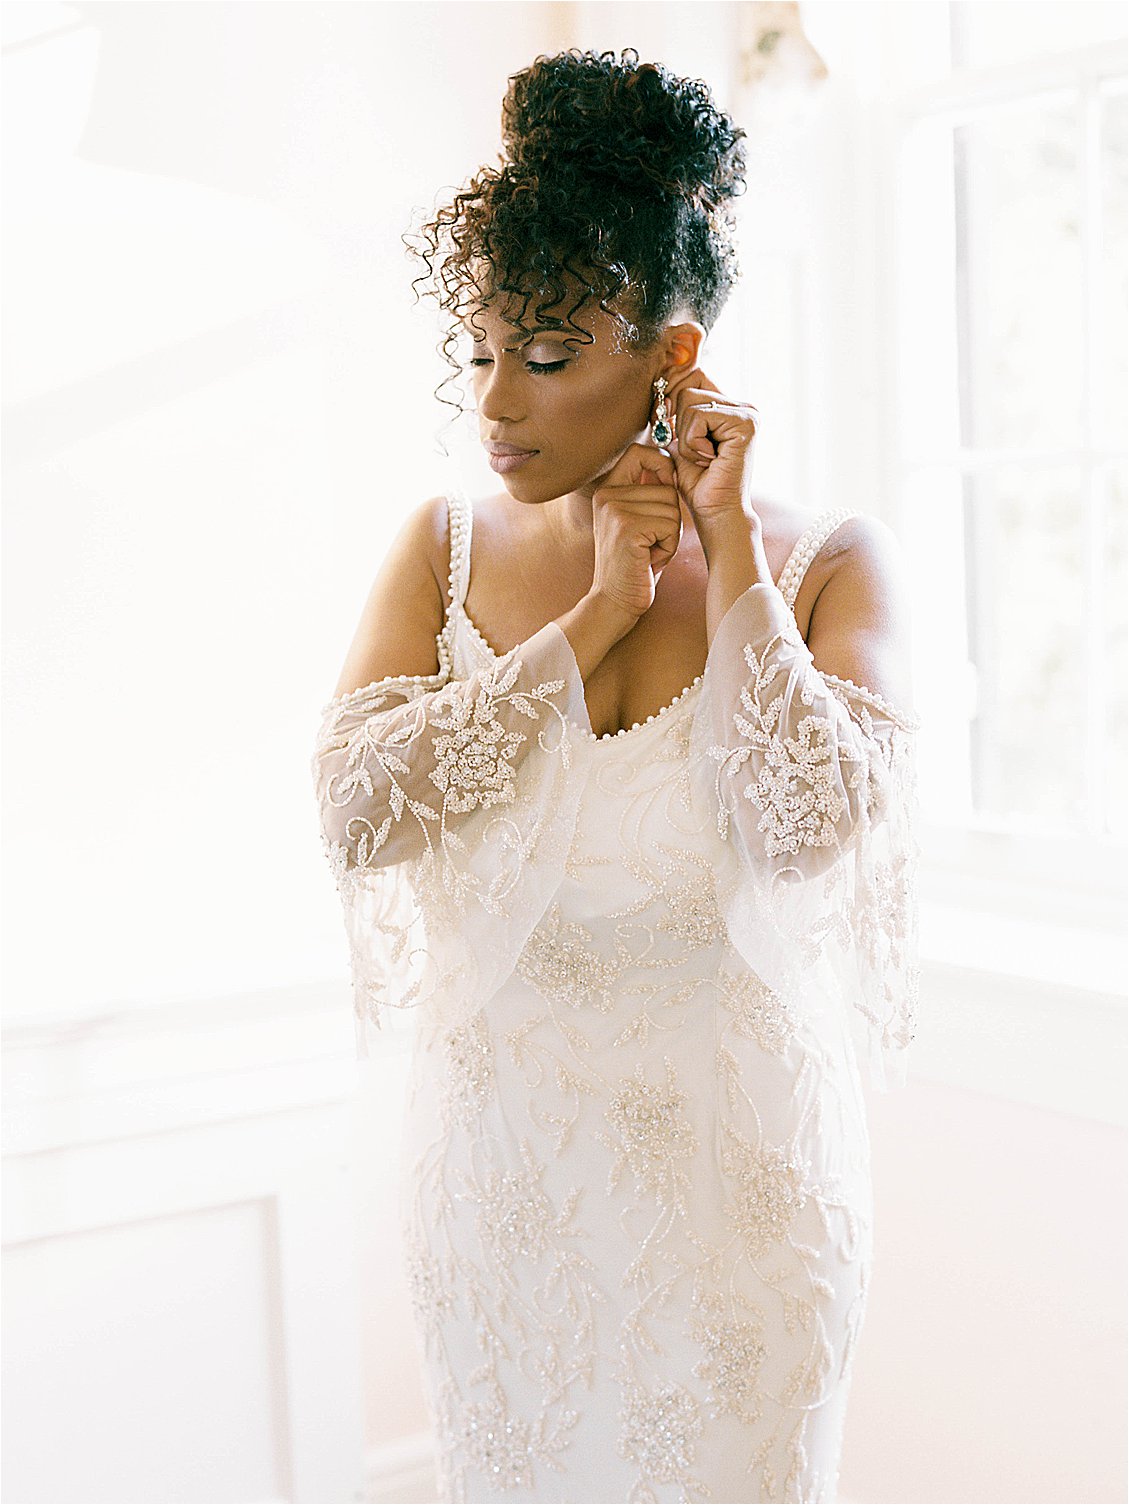 Bride in blush beaded and hand embroidered Theia Couture wedding gown photographed by DC + Destination film wedding photographer Renee Hollingshead